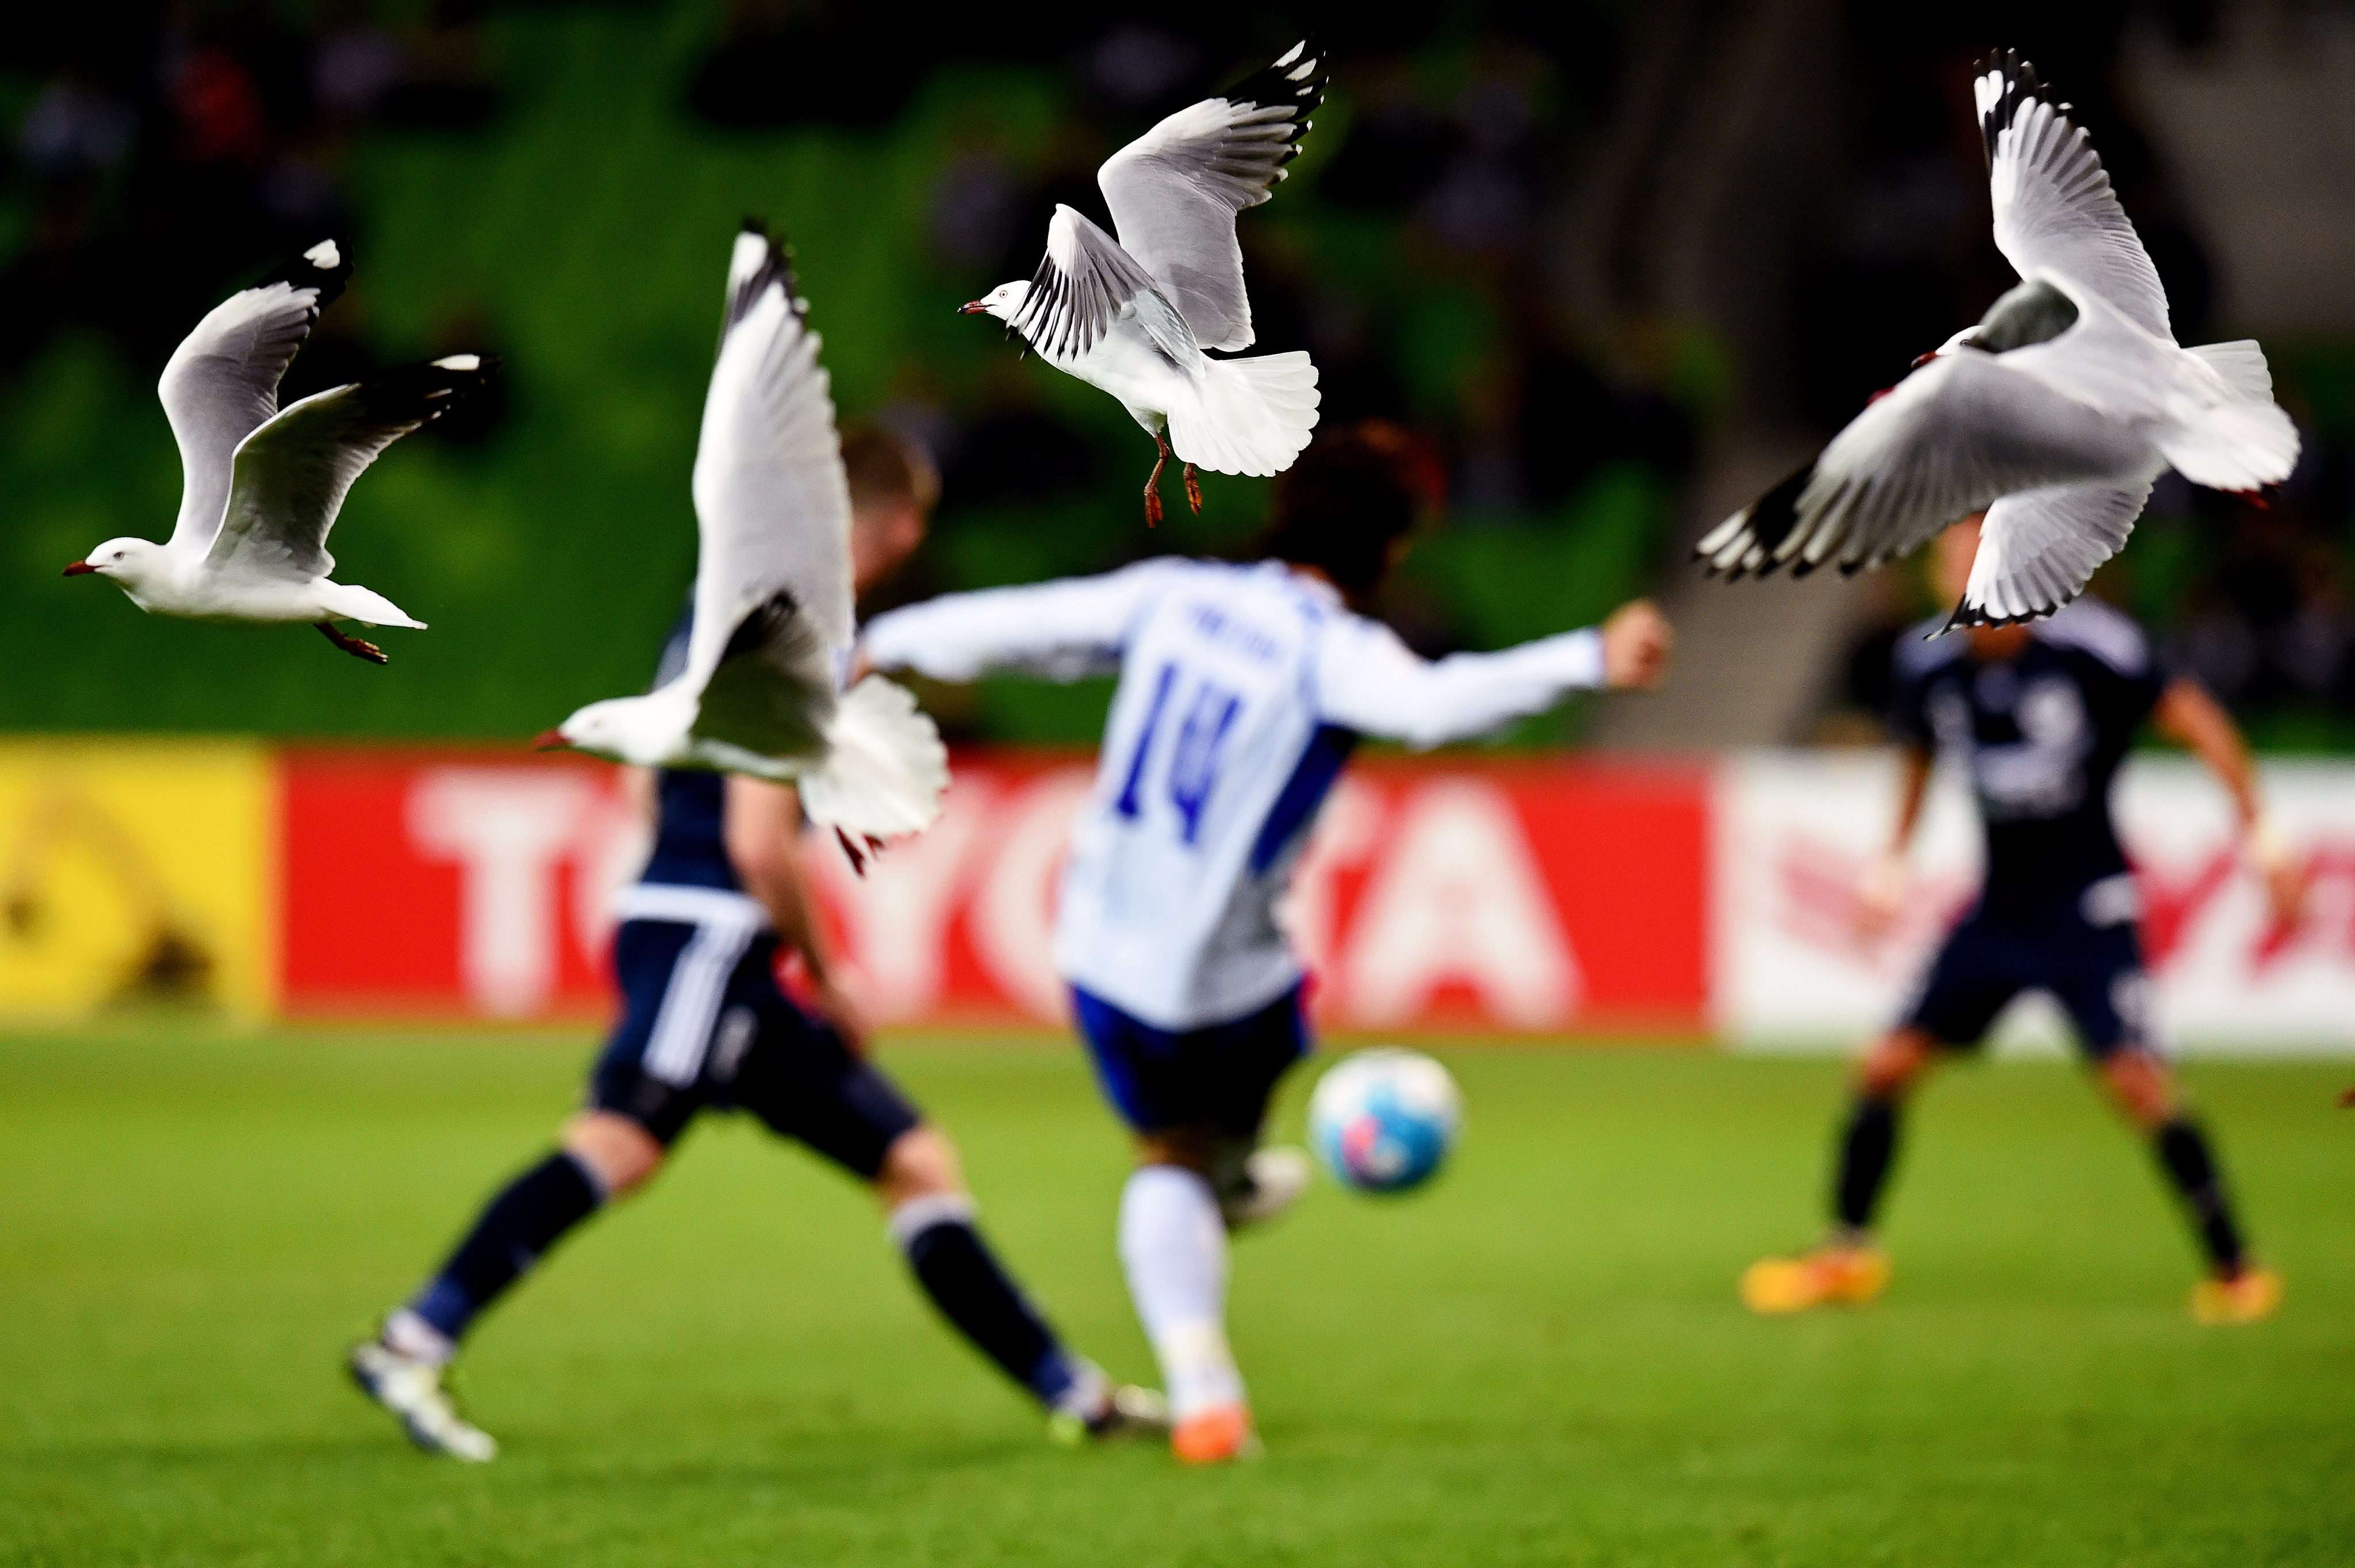 Seagulls fly past during the AFC Champions League Group G soccer match between Melbourne Victory and Gamba Osaka. Photo: EPA